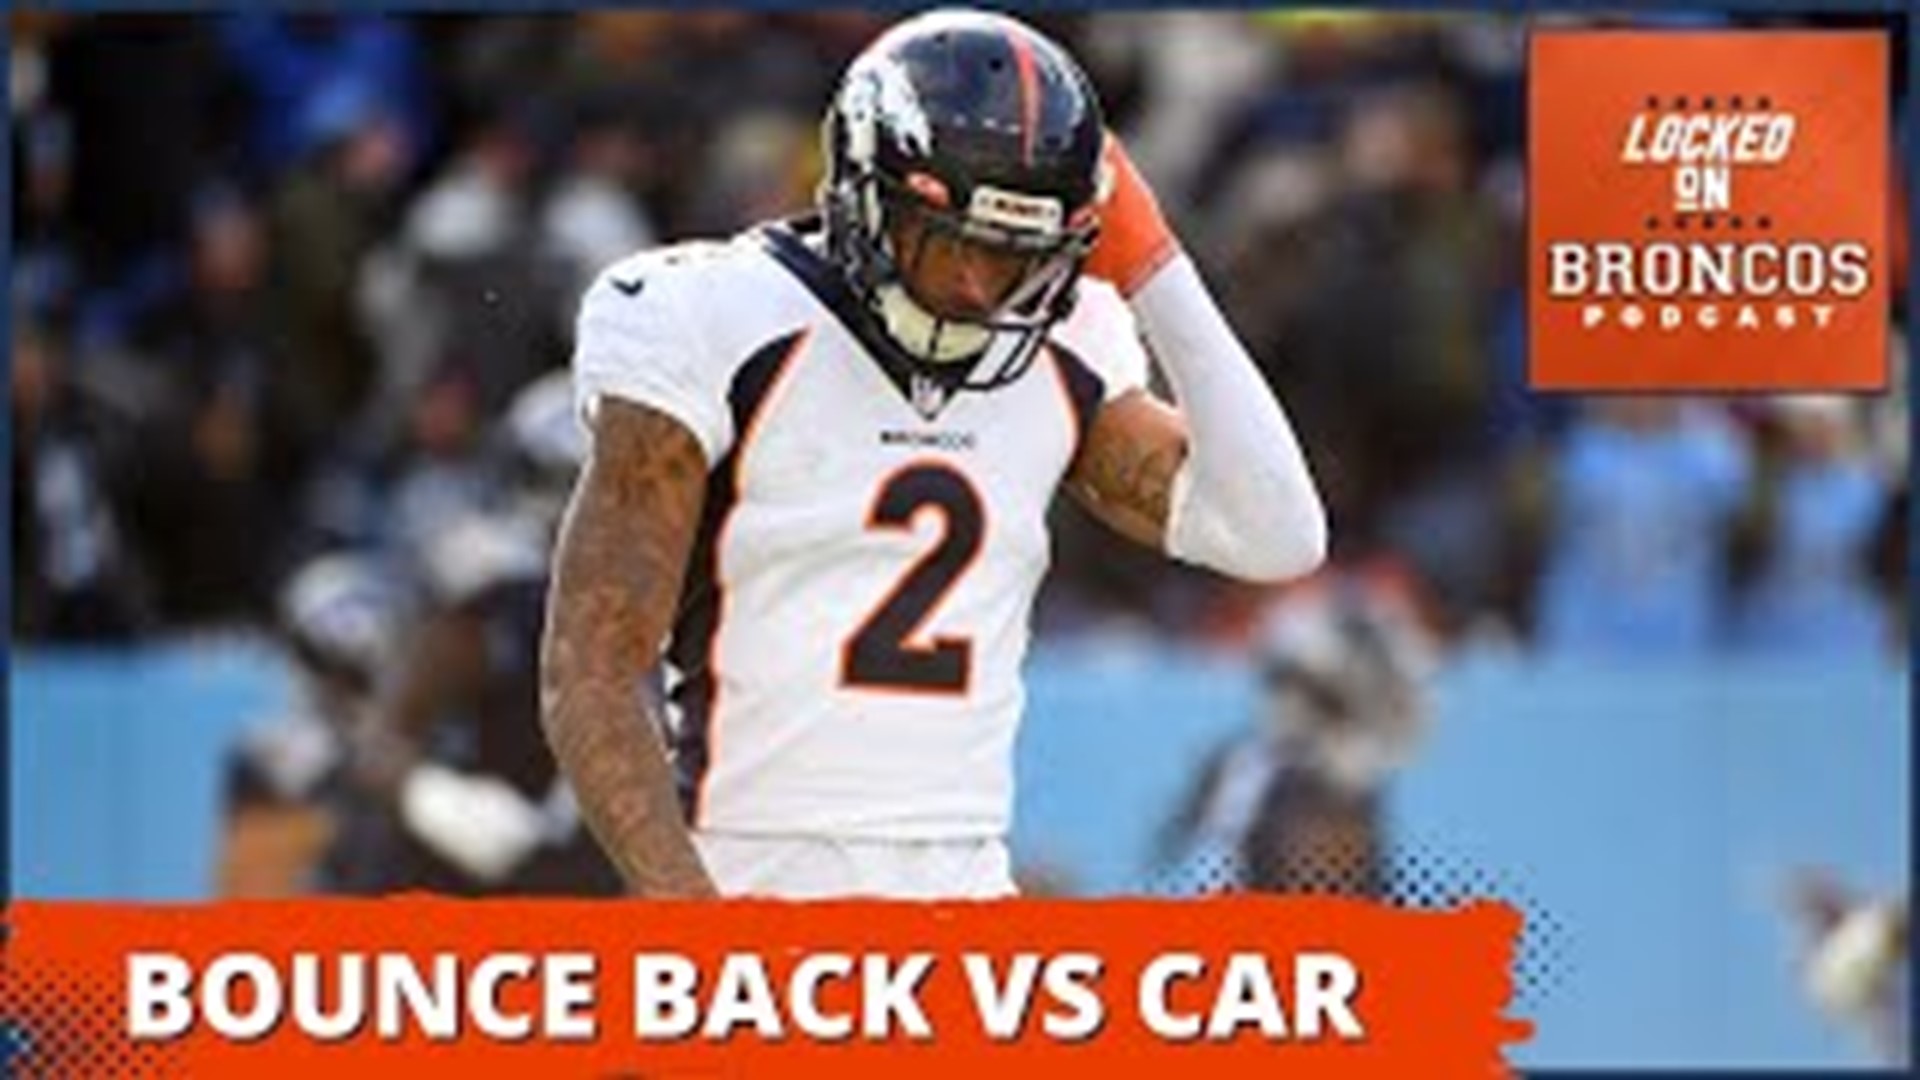 Can the Broncos defense bounce back as they prepare to face Sam Darnold and D.J. Moore?